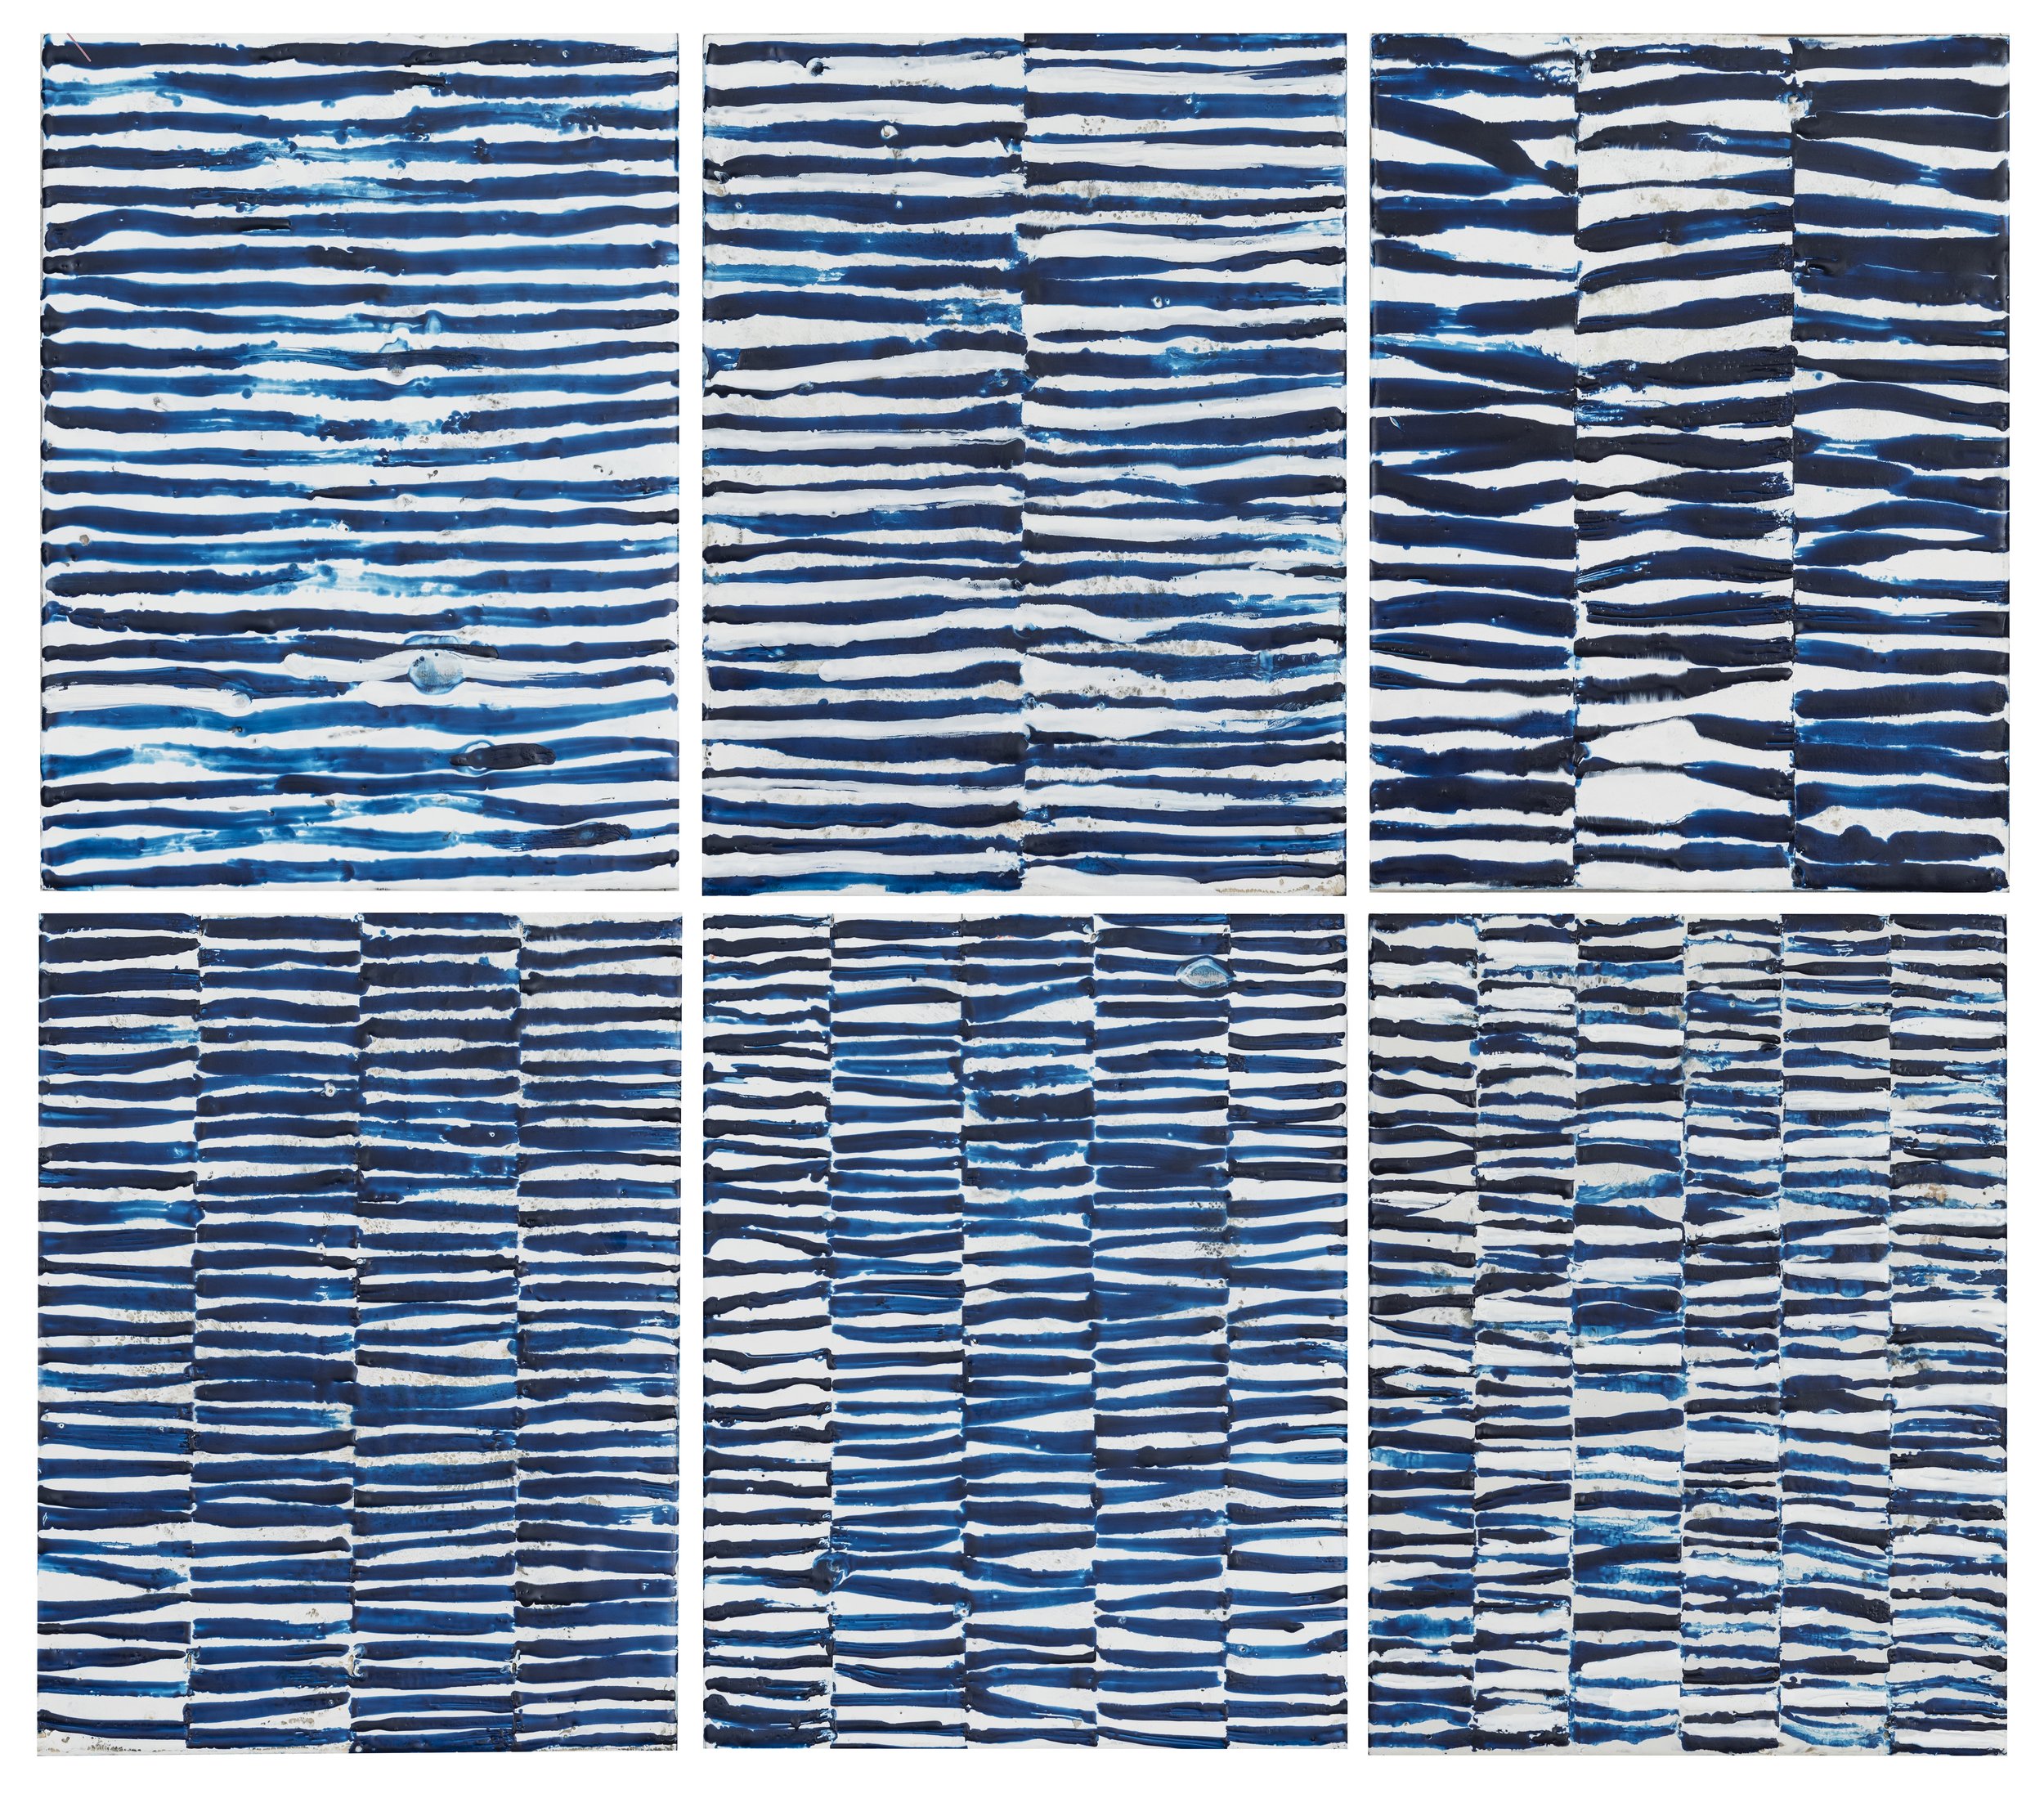  "Indigo", 2022, encaustic and collage on board, six panels, 12" x 9" each 